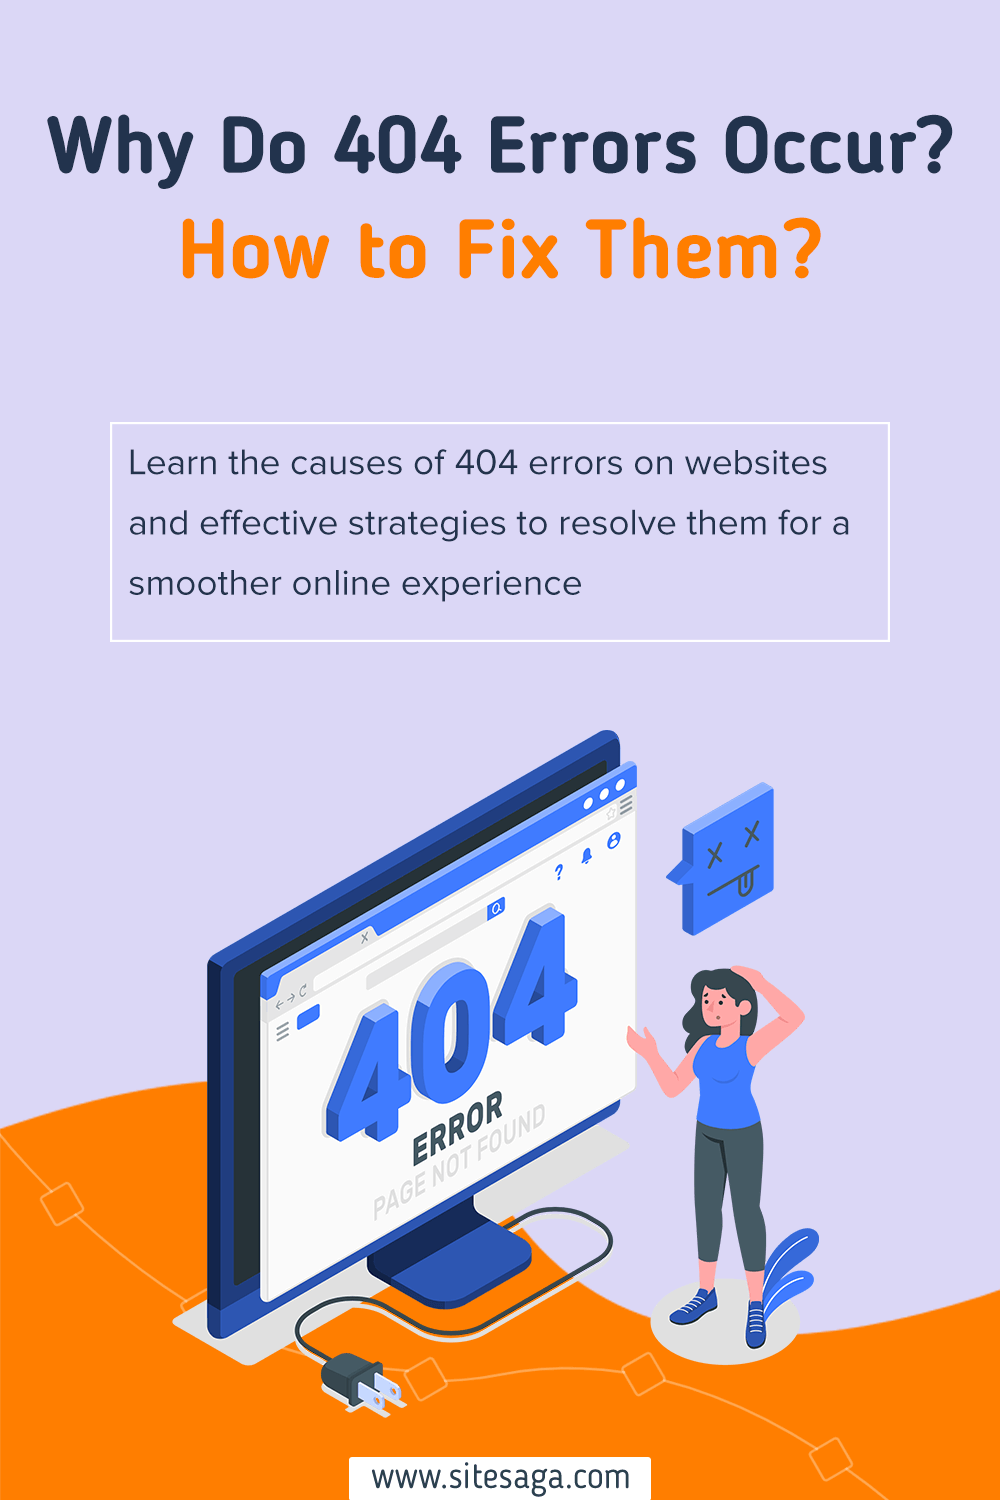 Why Do 404 Errors Occur on Websites and How to Fix Them? - SiteSaga